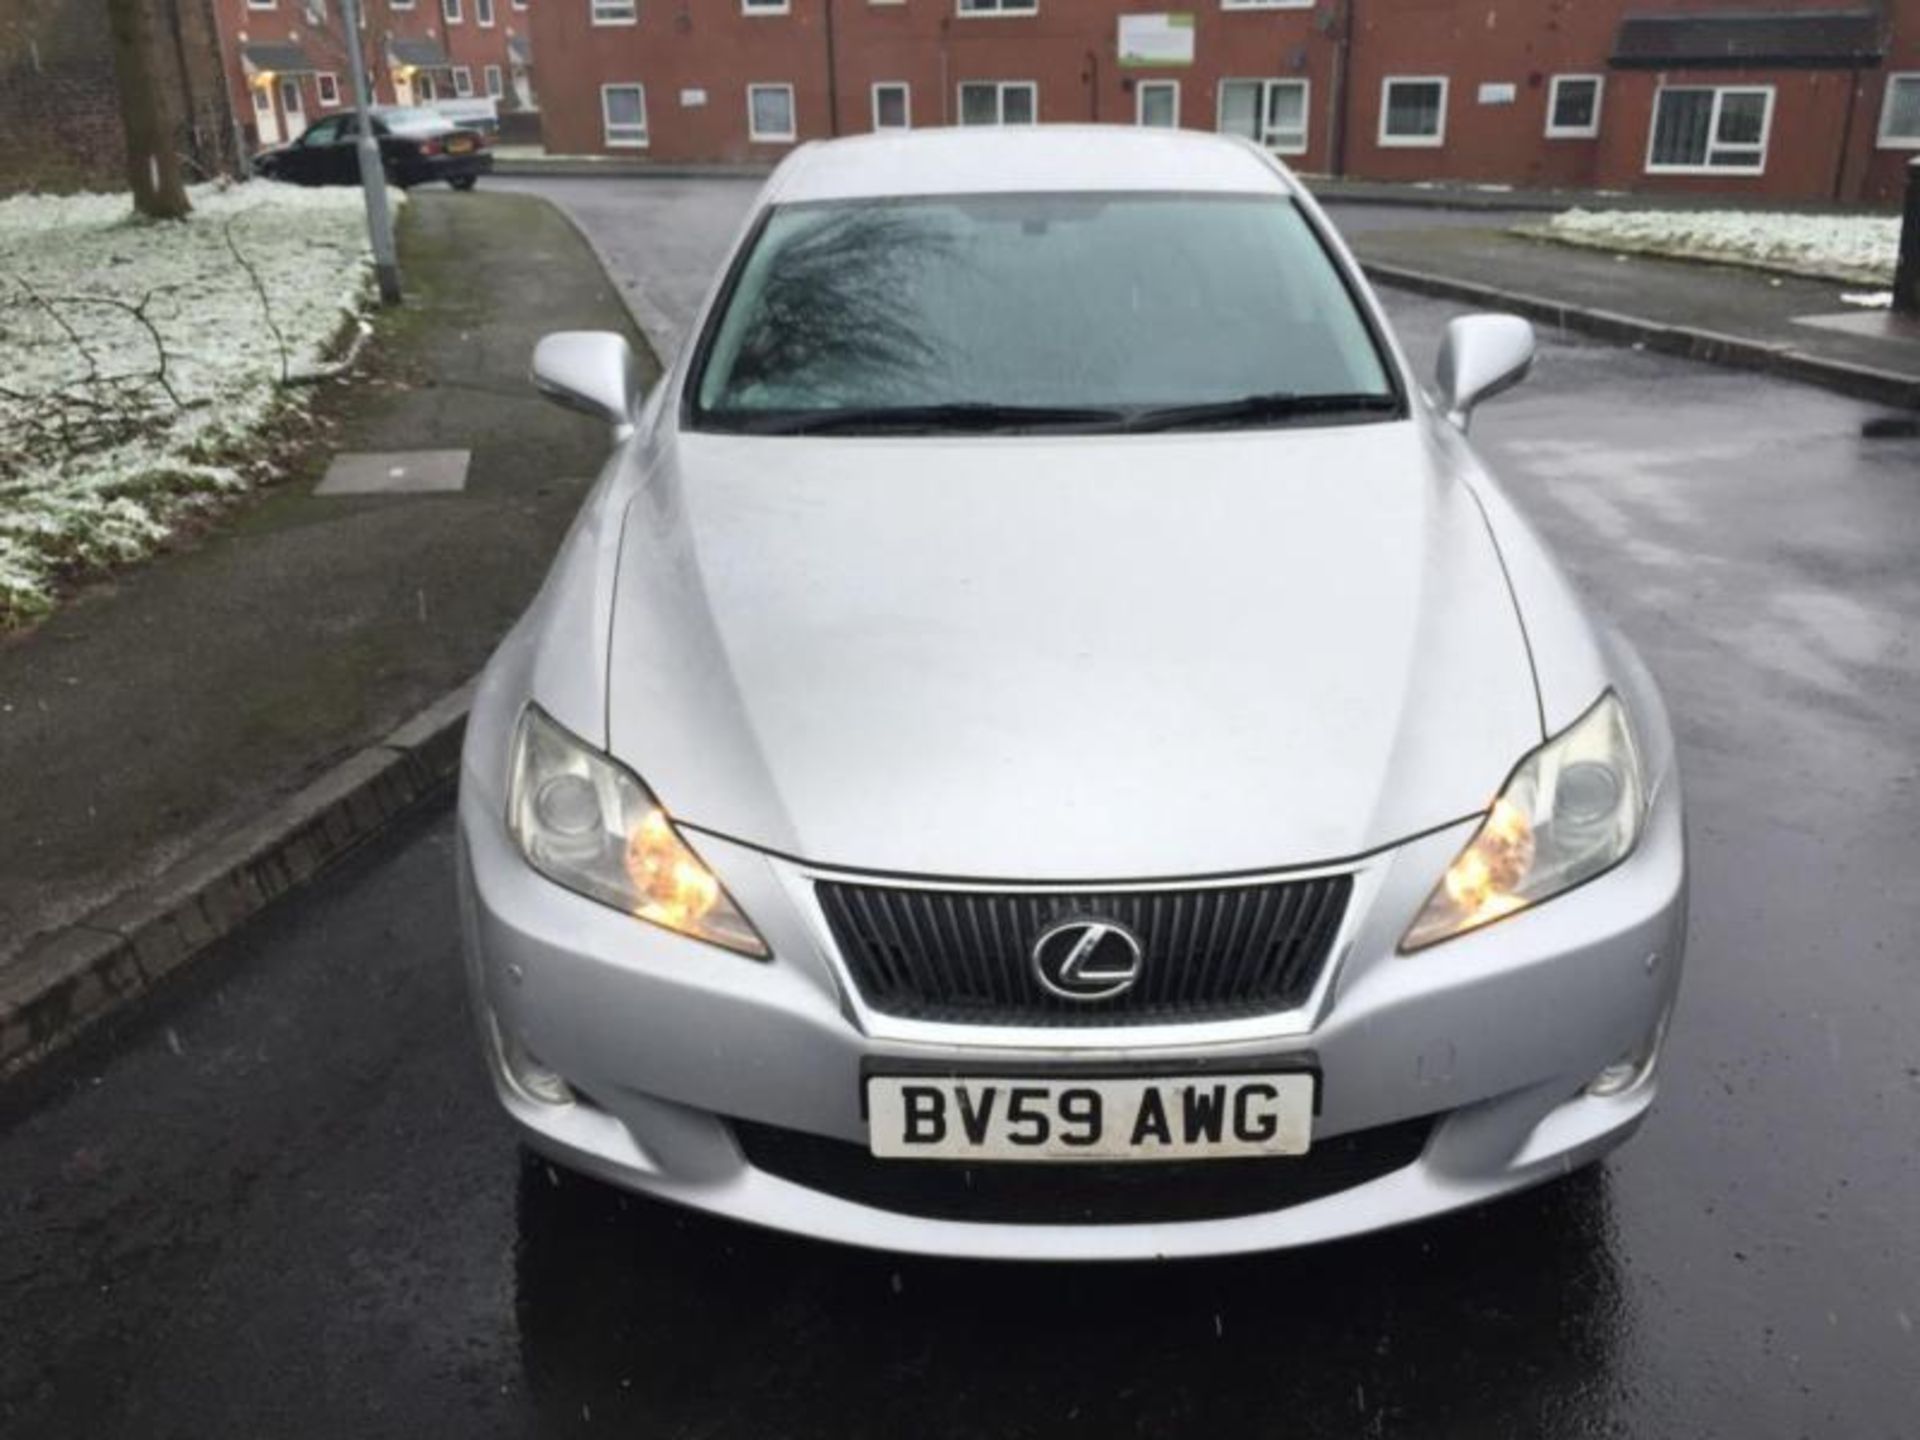 LEXUS, IS 250 SE-L, BV59 AWG, FIRST DATE OF REGISTRATION 08/09/2009, 2.5 LITRE, PETROL, AUTO, 4 DOOR